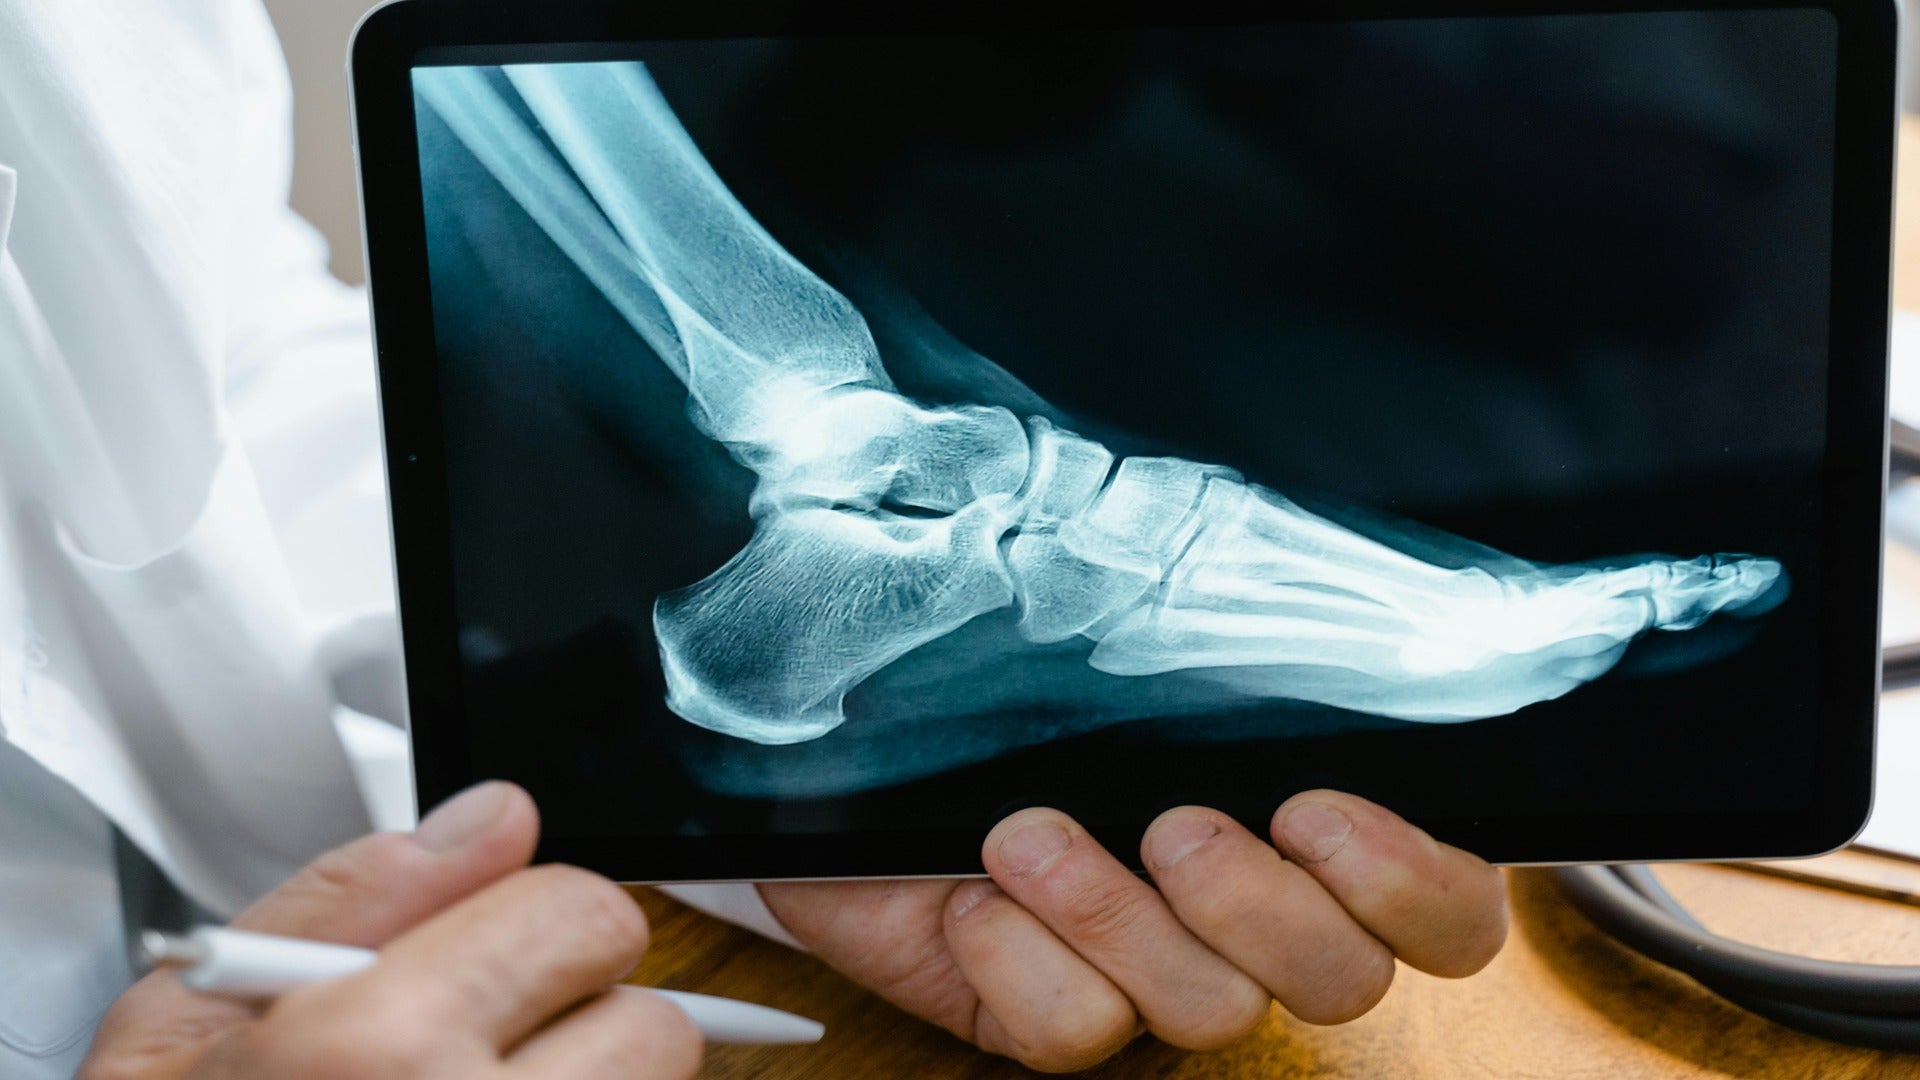 An image of a doctor holding a foot x-ray.